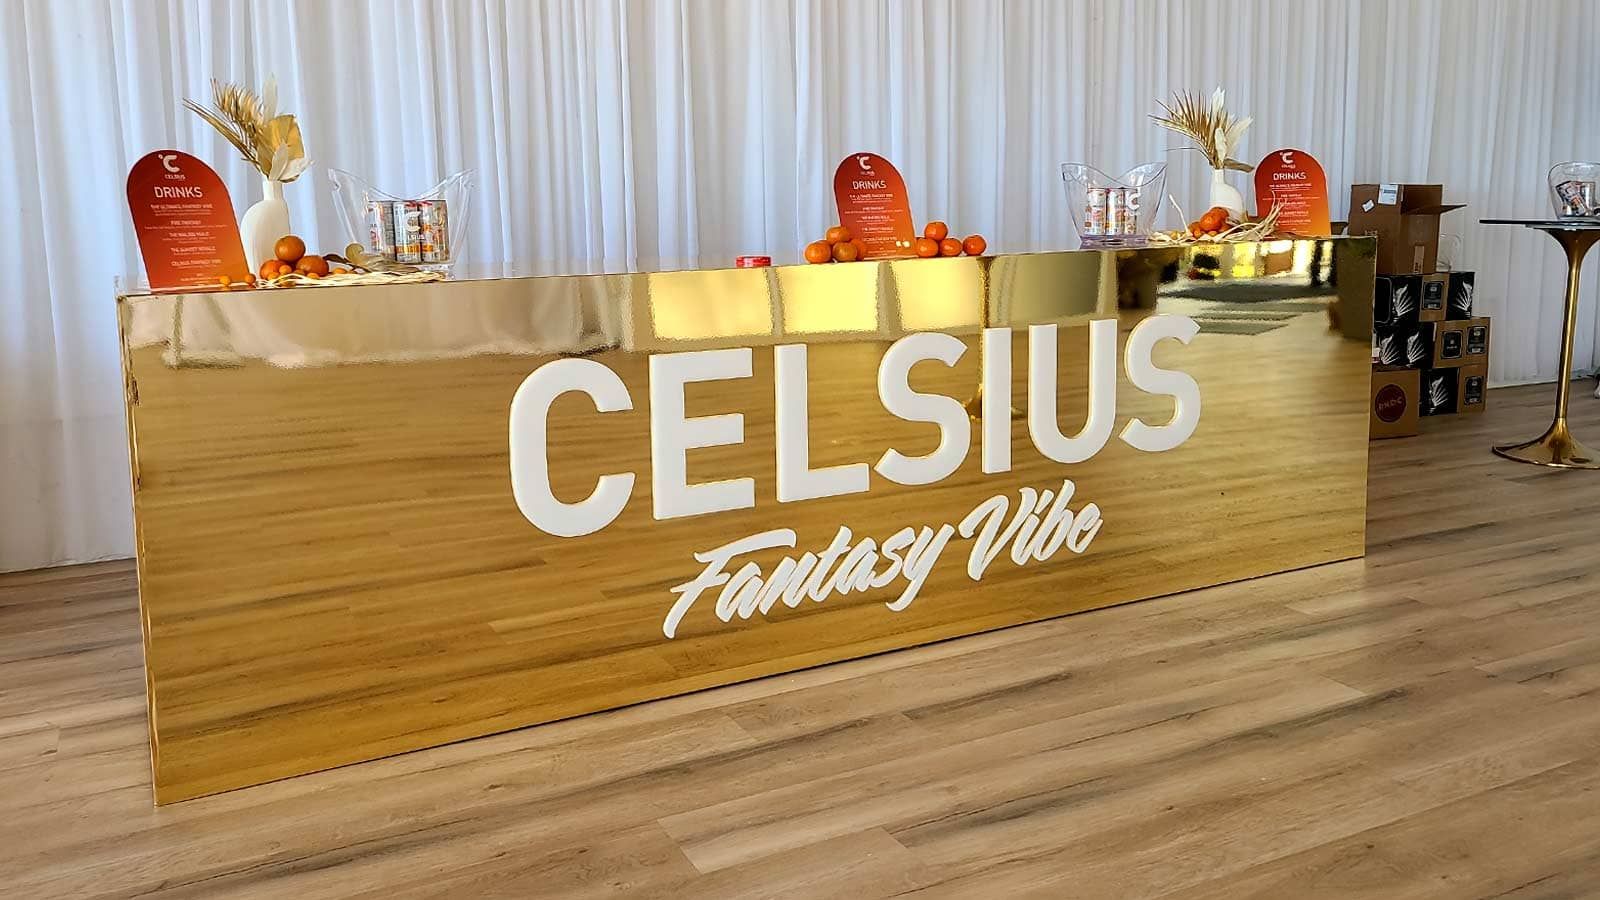 CELSIUS event signage for interior use